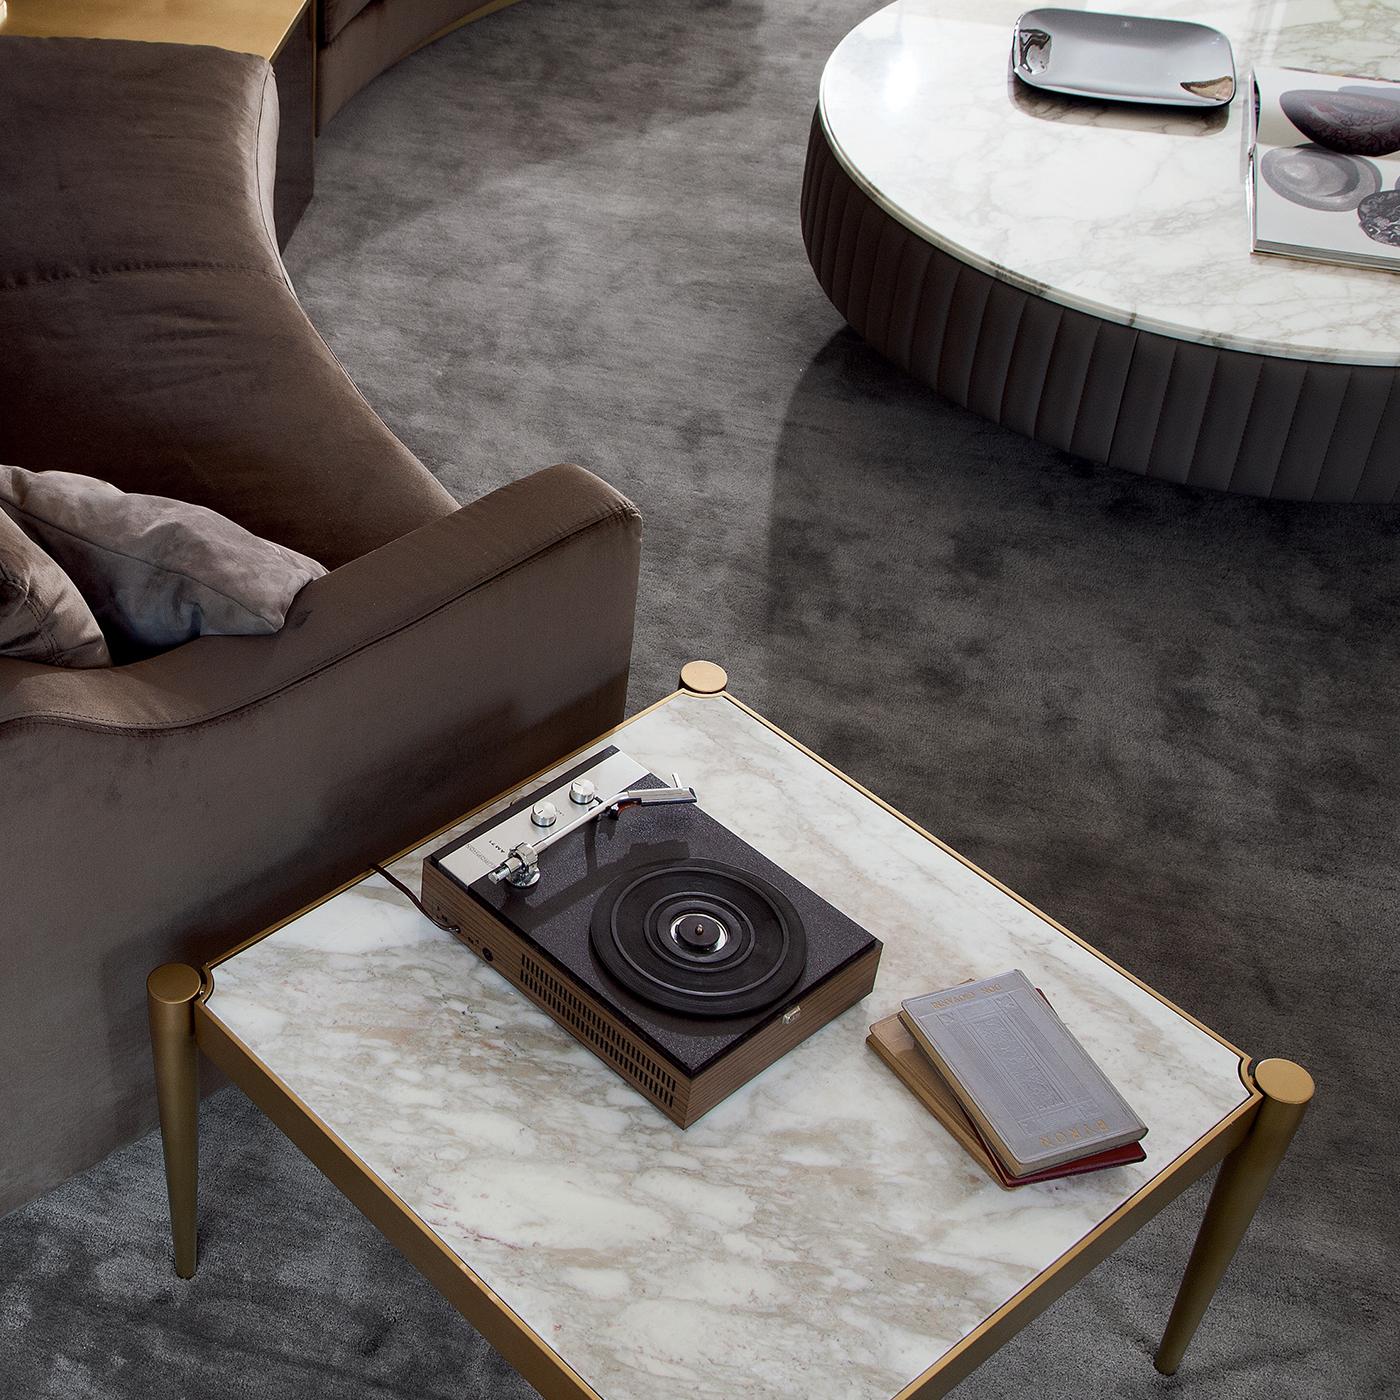 The clean-cut lines of this polished coffee table contrast with the opulence of the Calacatta gold marble top and give it a versatile quality that makes it suitable for all decors. The square stainless steel structure features a unique encased